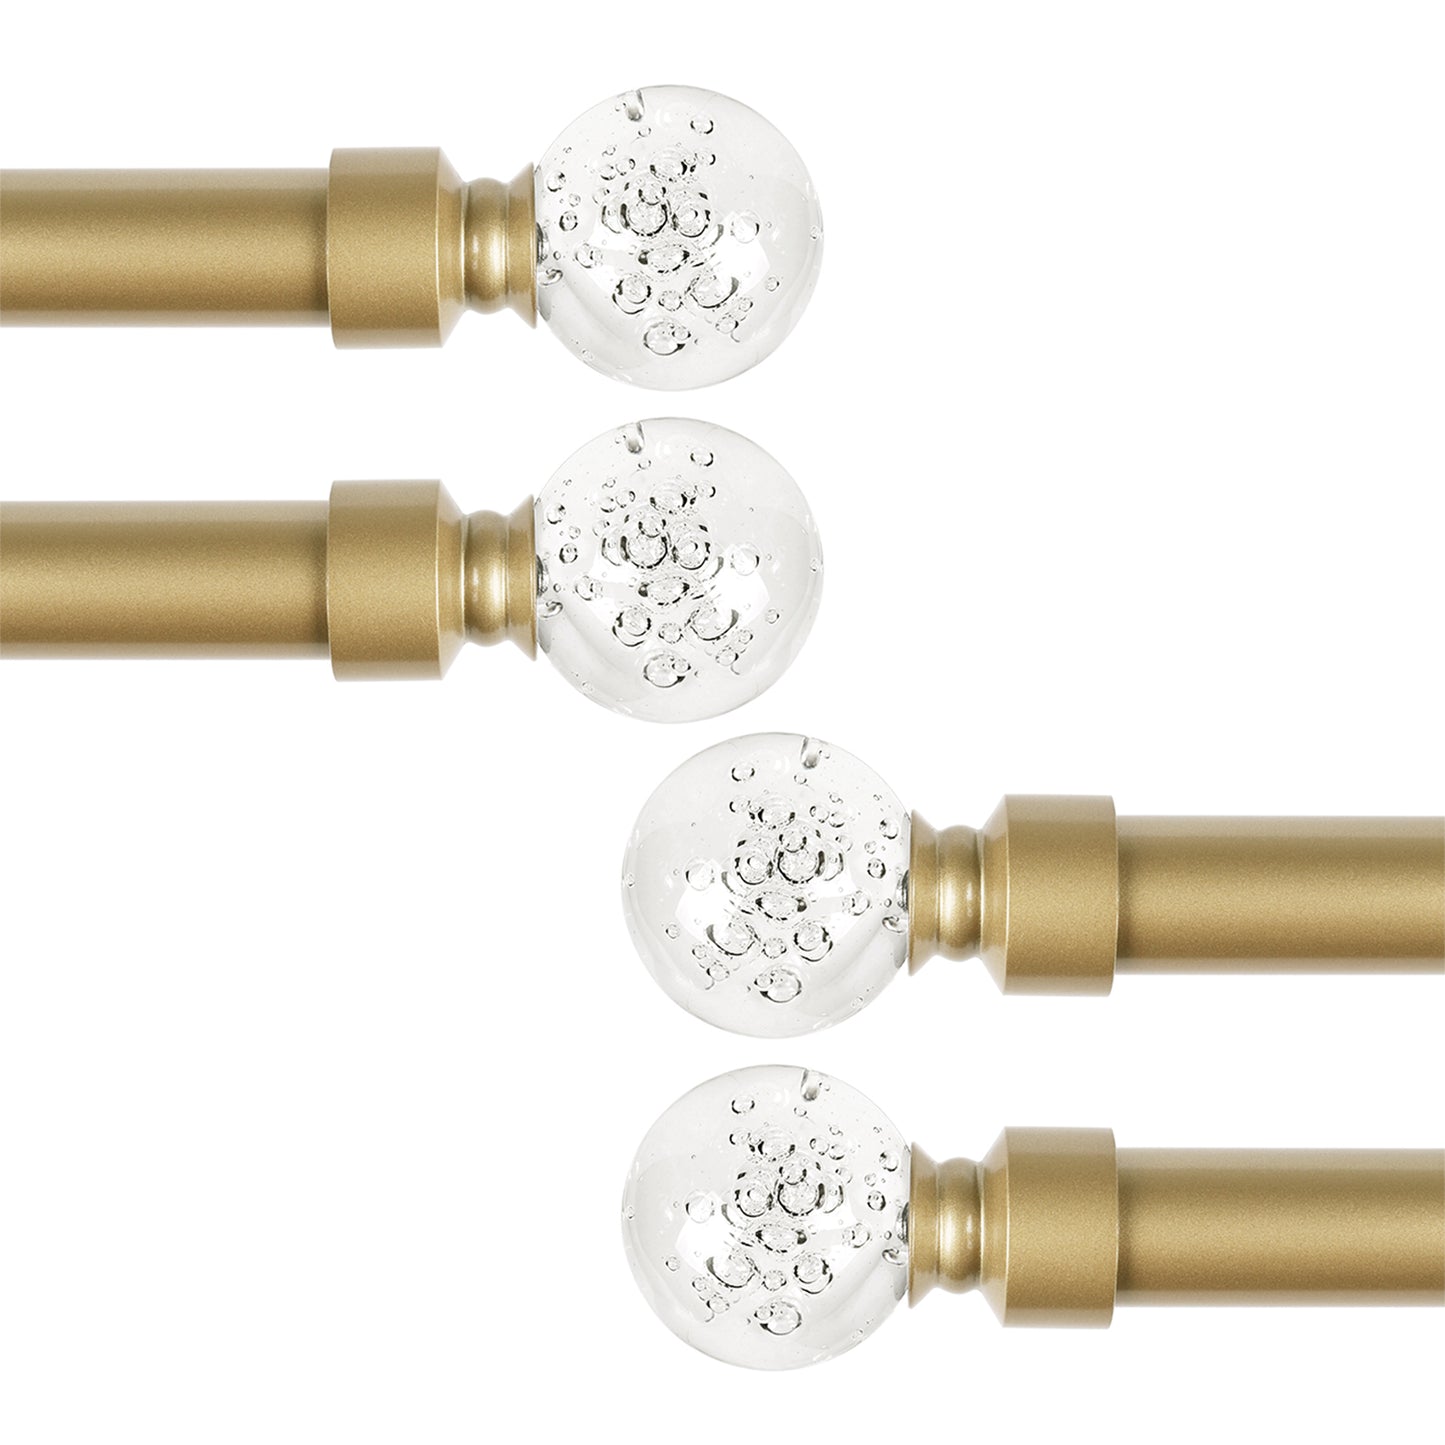 1 Inch Brass Adjustable Drapery Rod with Crystal Ball Finials, 22 to 86 Inches